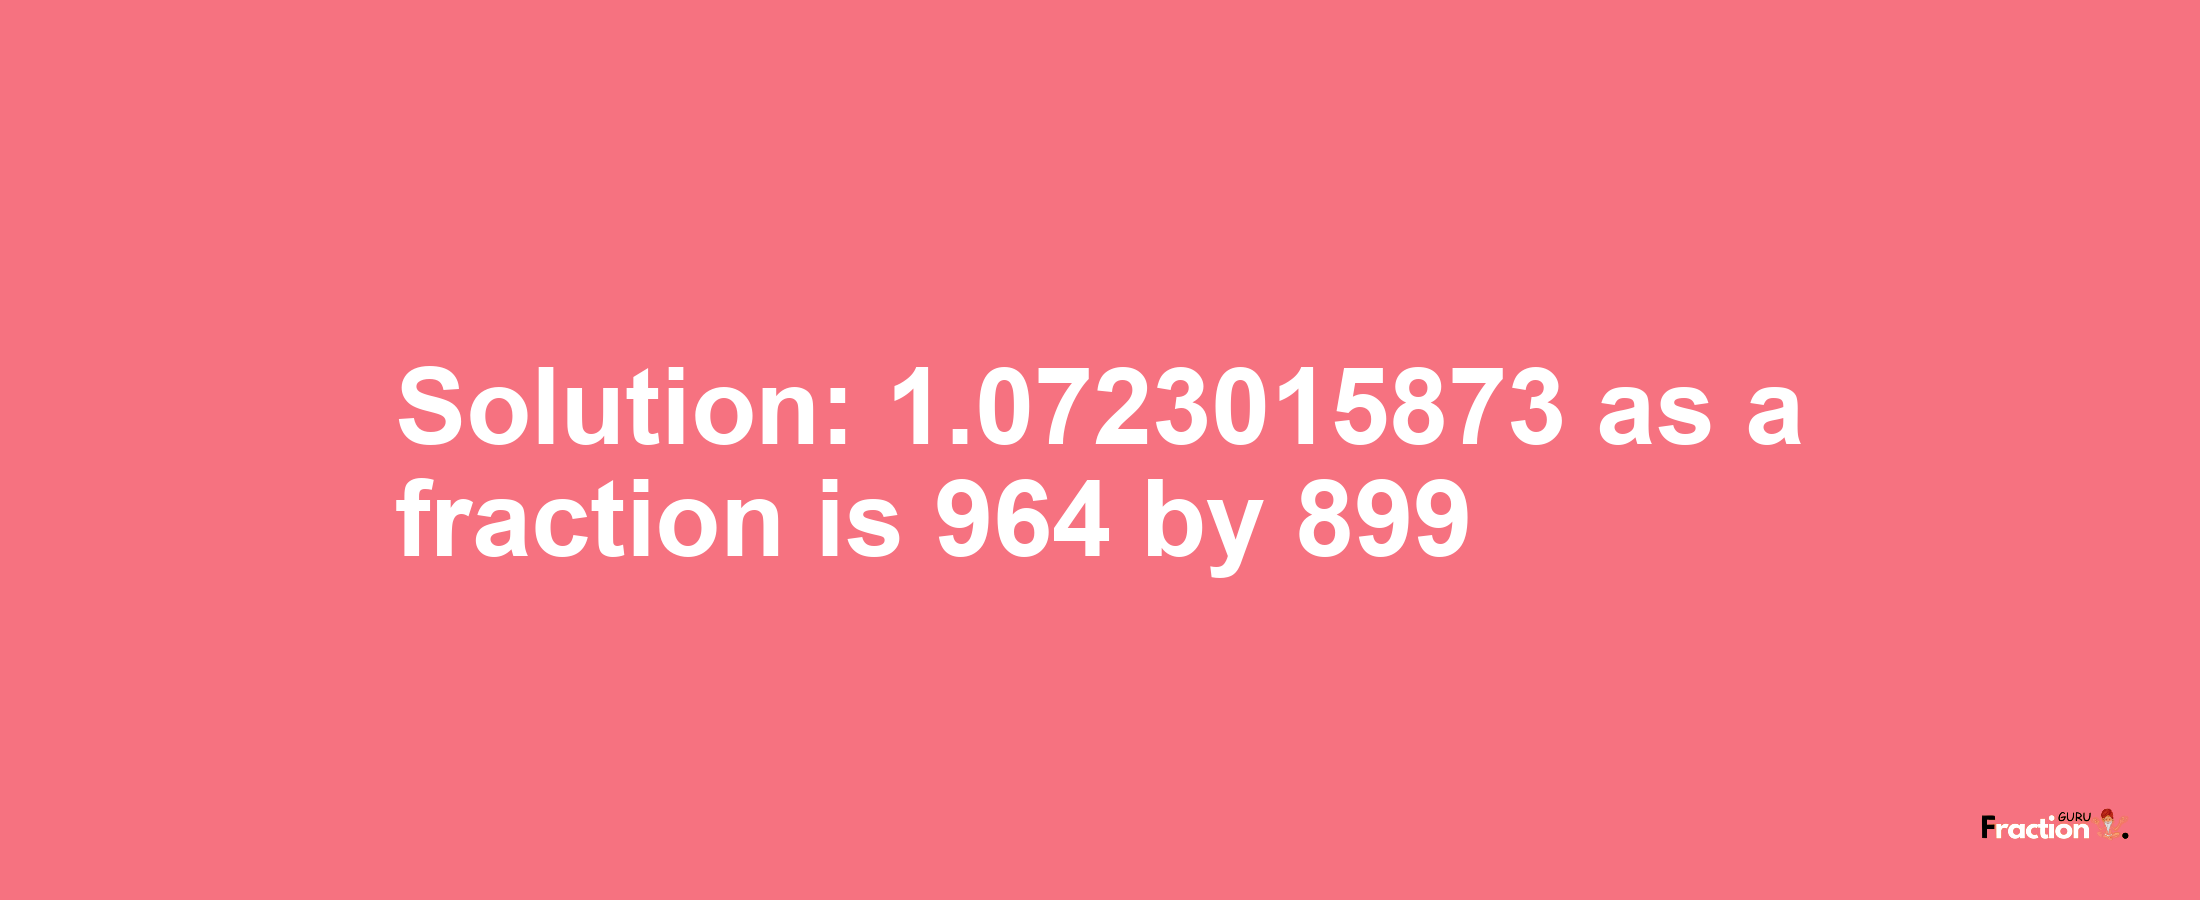 Solution:1.0723015873 as a fraction is 964/899